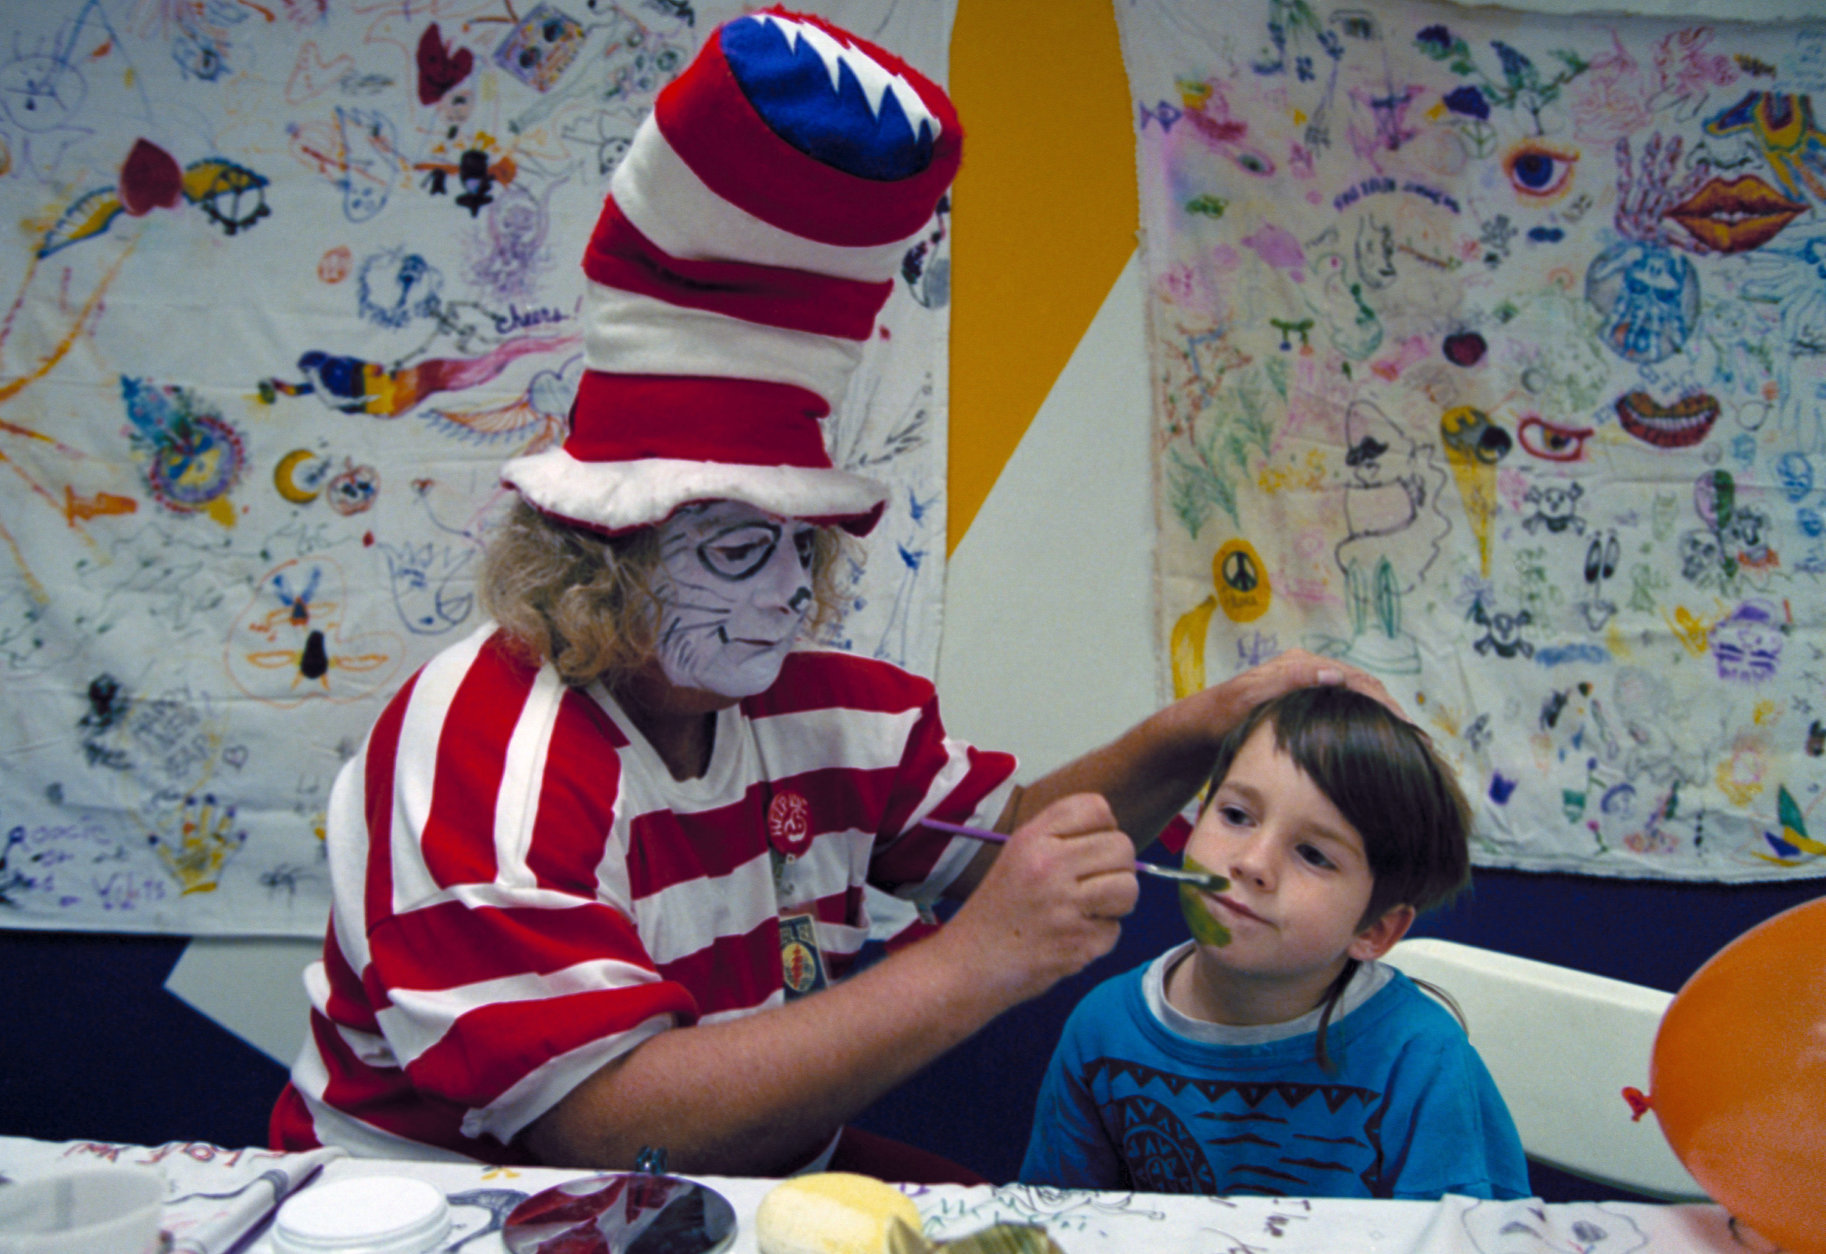 Wavy Gravy, costumed as The Cat in the Hat, paints the face of 5-year-Old Jesse James Nugent backstage at the Oakland Coliseum during a Grateful Dead concer February 14, 1993.  Gravy, a backstage presence since the 1960s, entertains kids in the daycare room set up for the children of the band members and crew. (AP Photo/Eric Risberg)